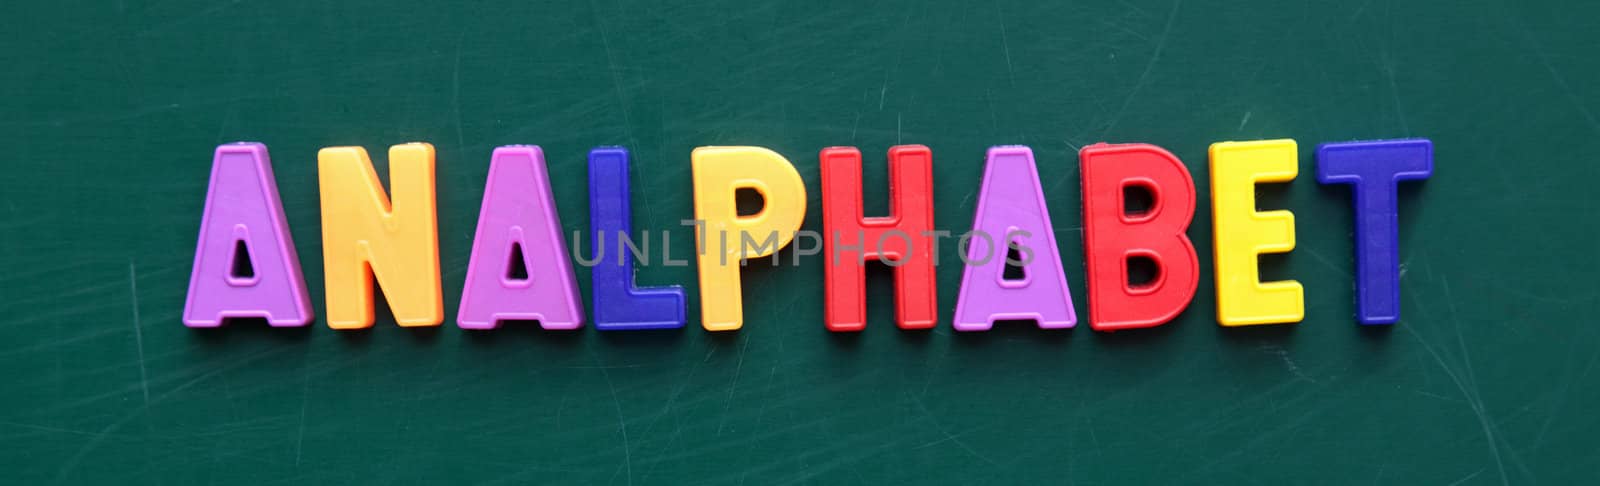 The German term analphabet in colorful letters on a blackboard.